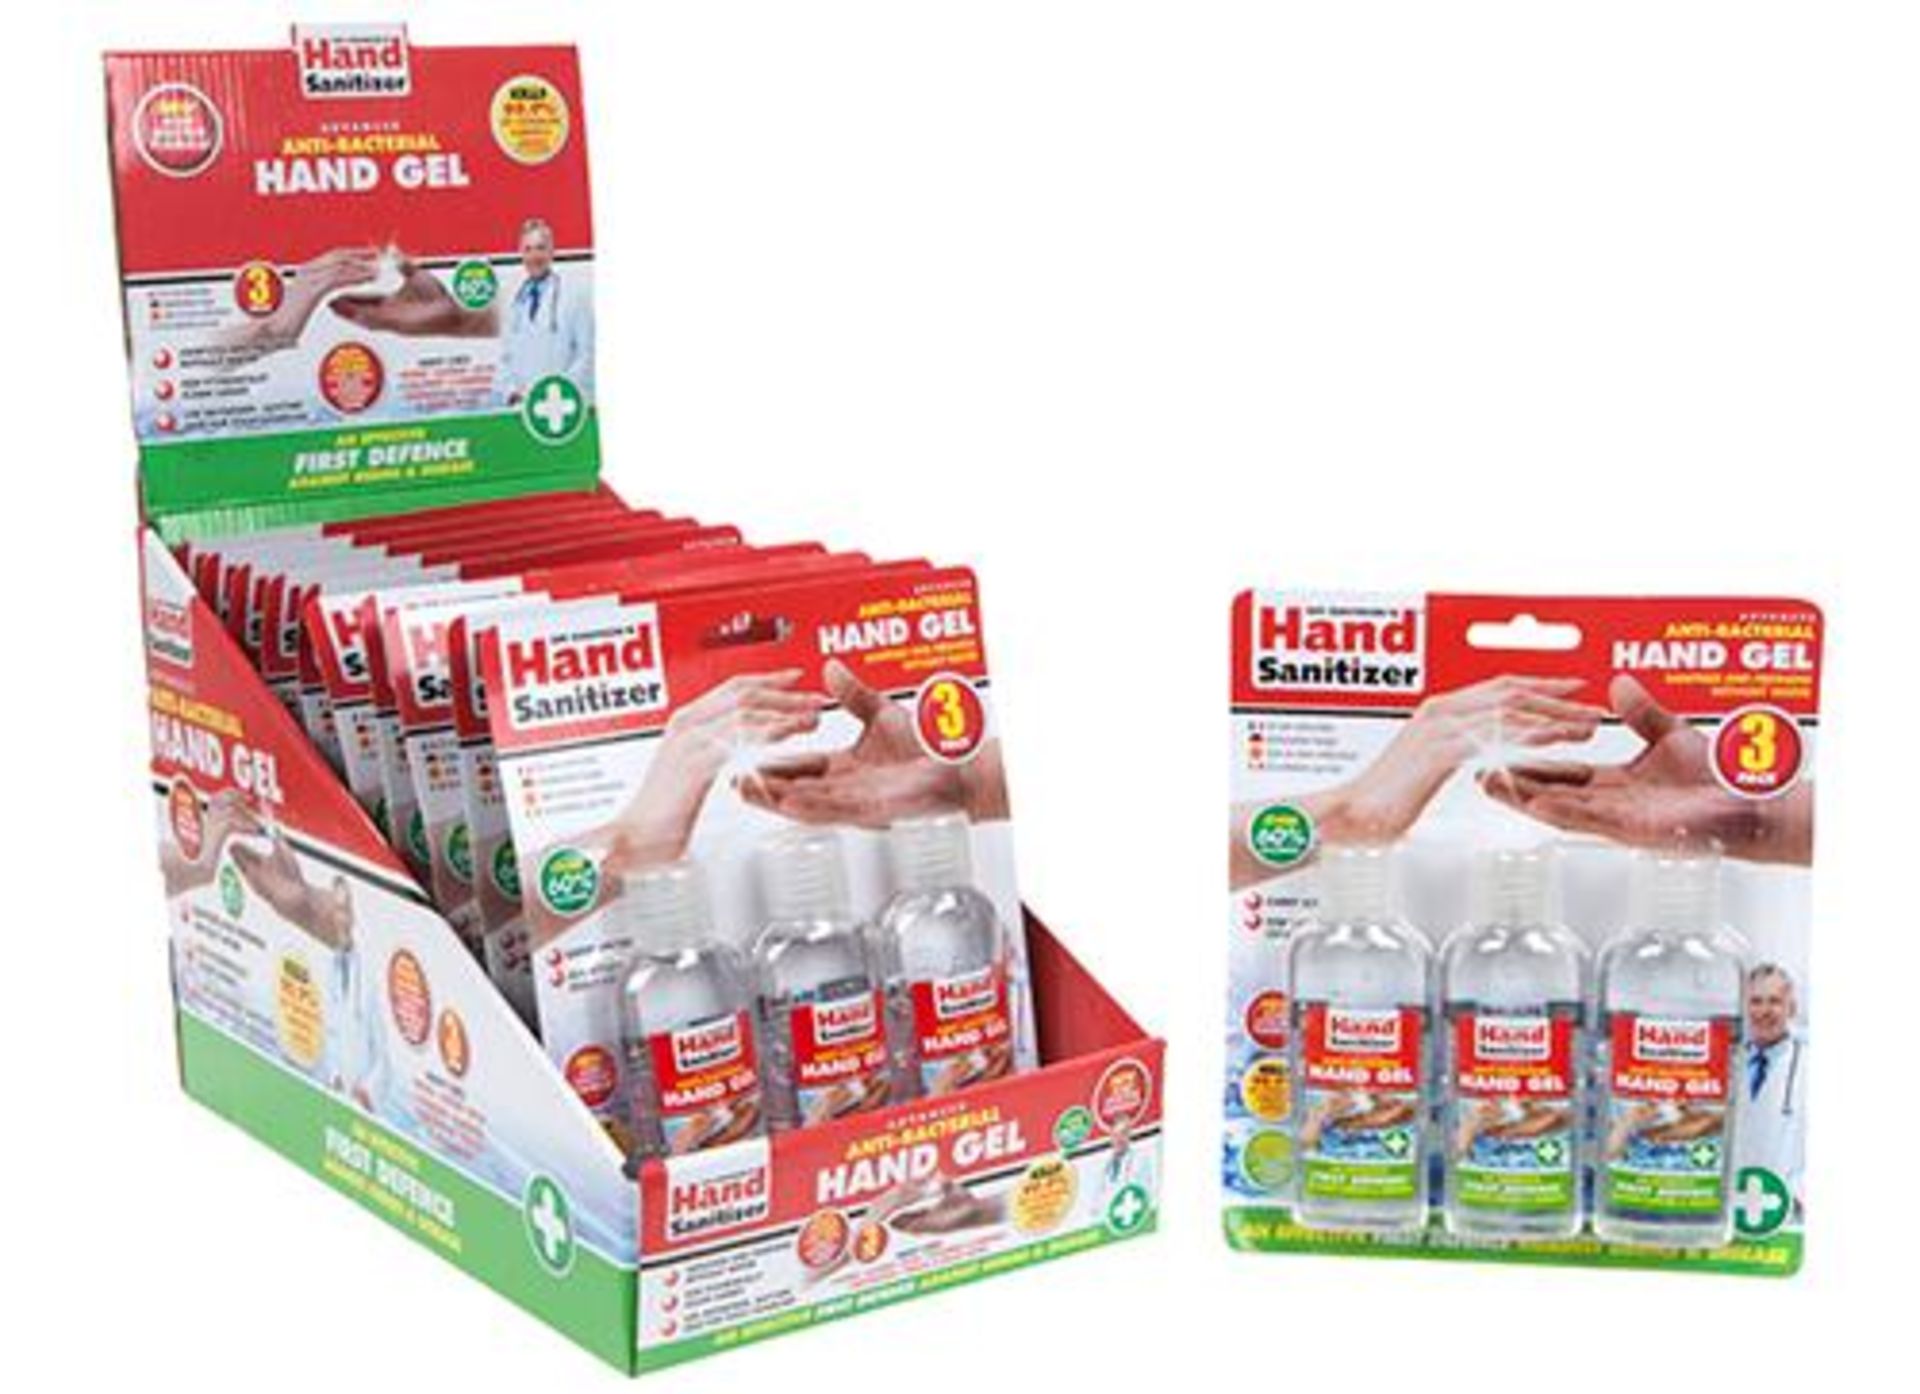 V Brand New 3 Bottles of Antibacterial Hand Sanitiser X 2 YOUR BID PRICE TO BE MULTIPLIED BY TWO